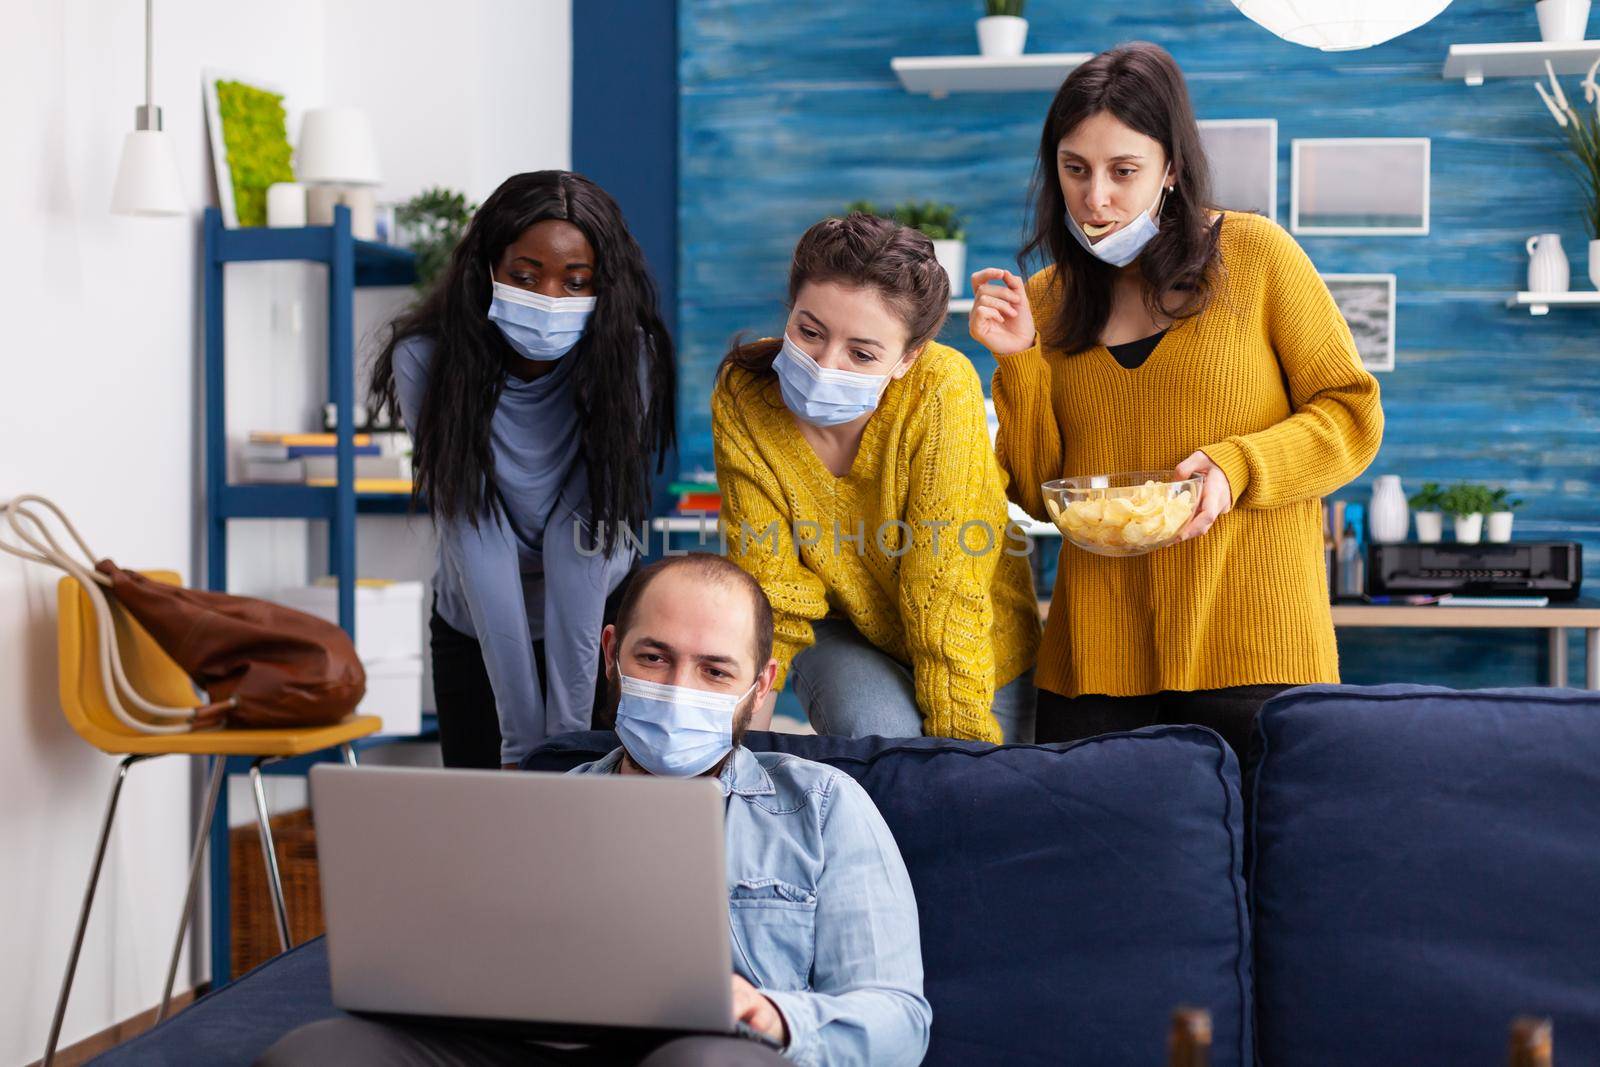 Group of multi ethnic friends keeping social distancing wearing face mask to prevent spread of coronavirus looking at laptop in home living room spending time together drinking beer eating chips. Conceptual image.